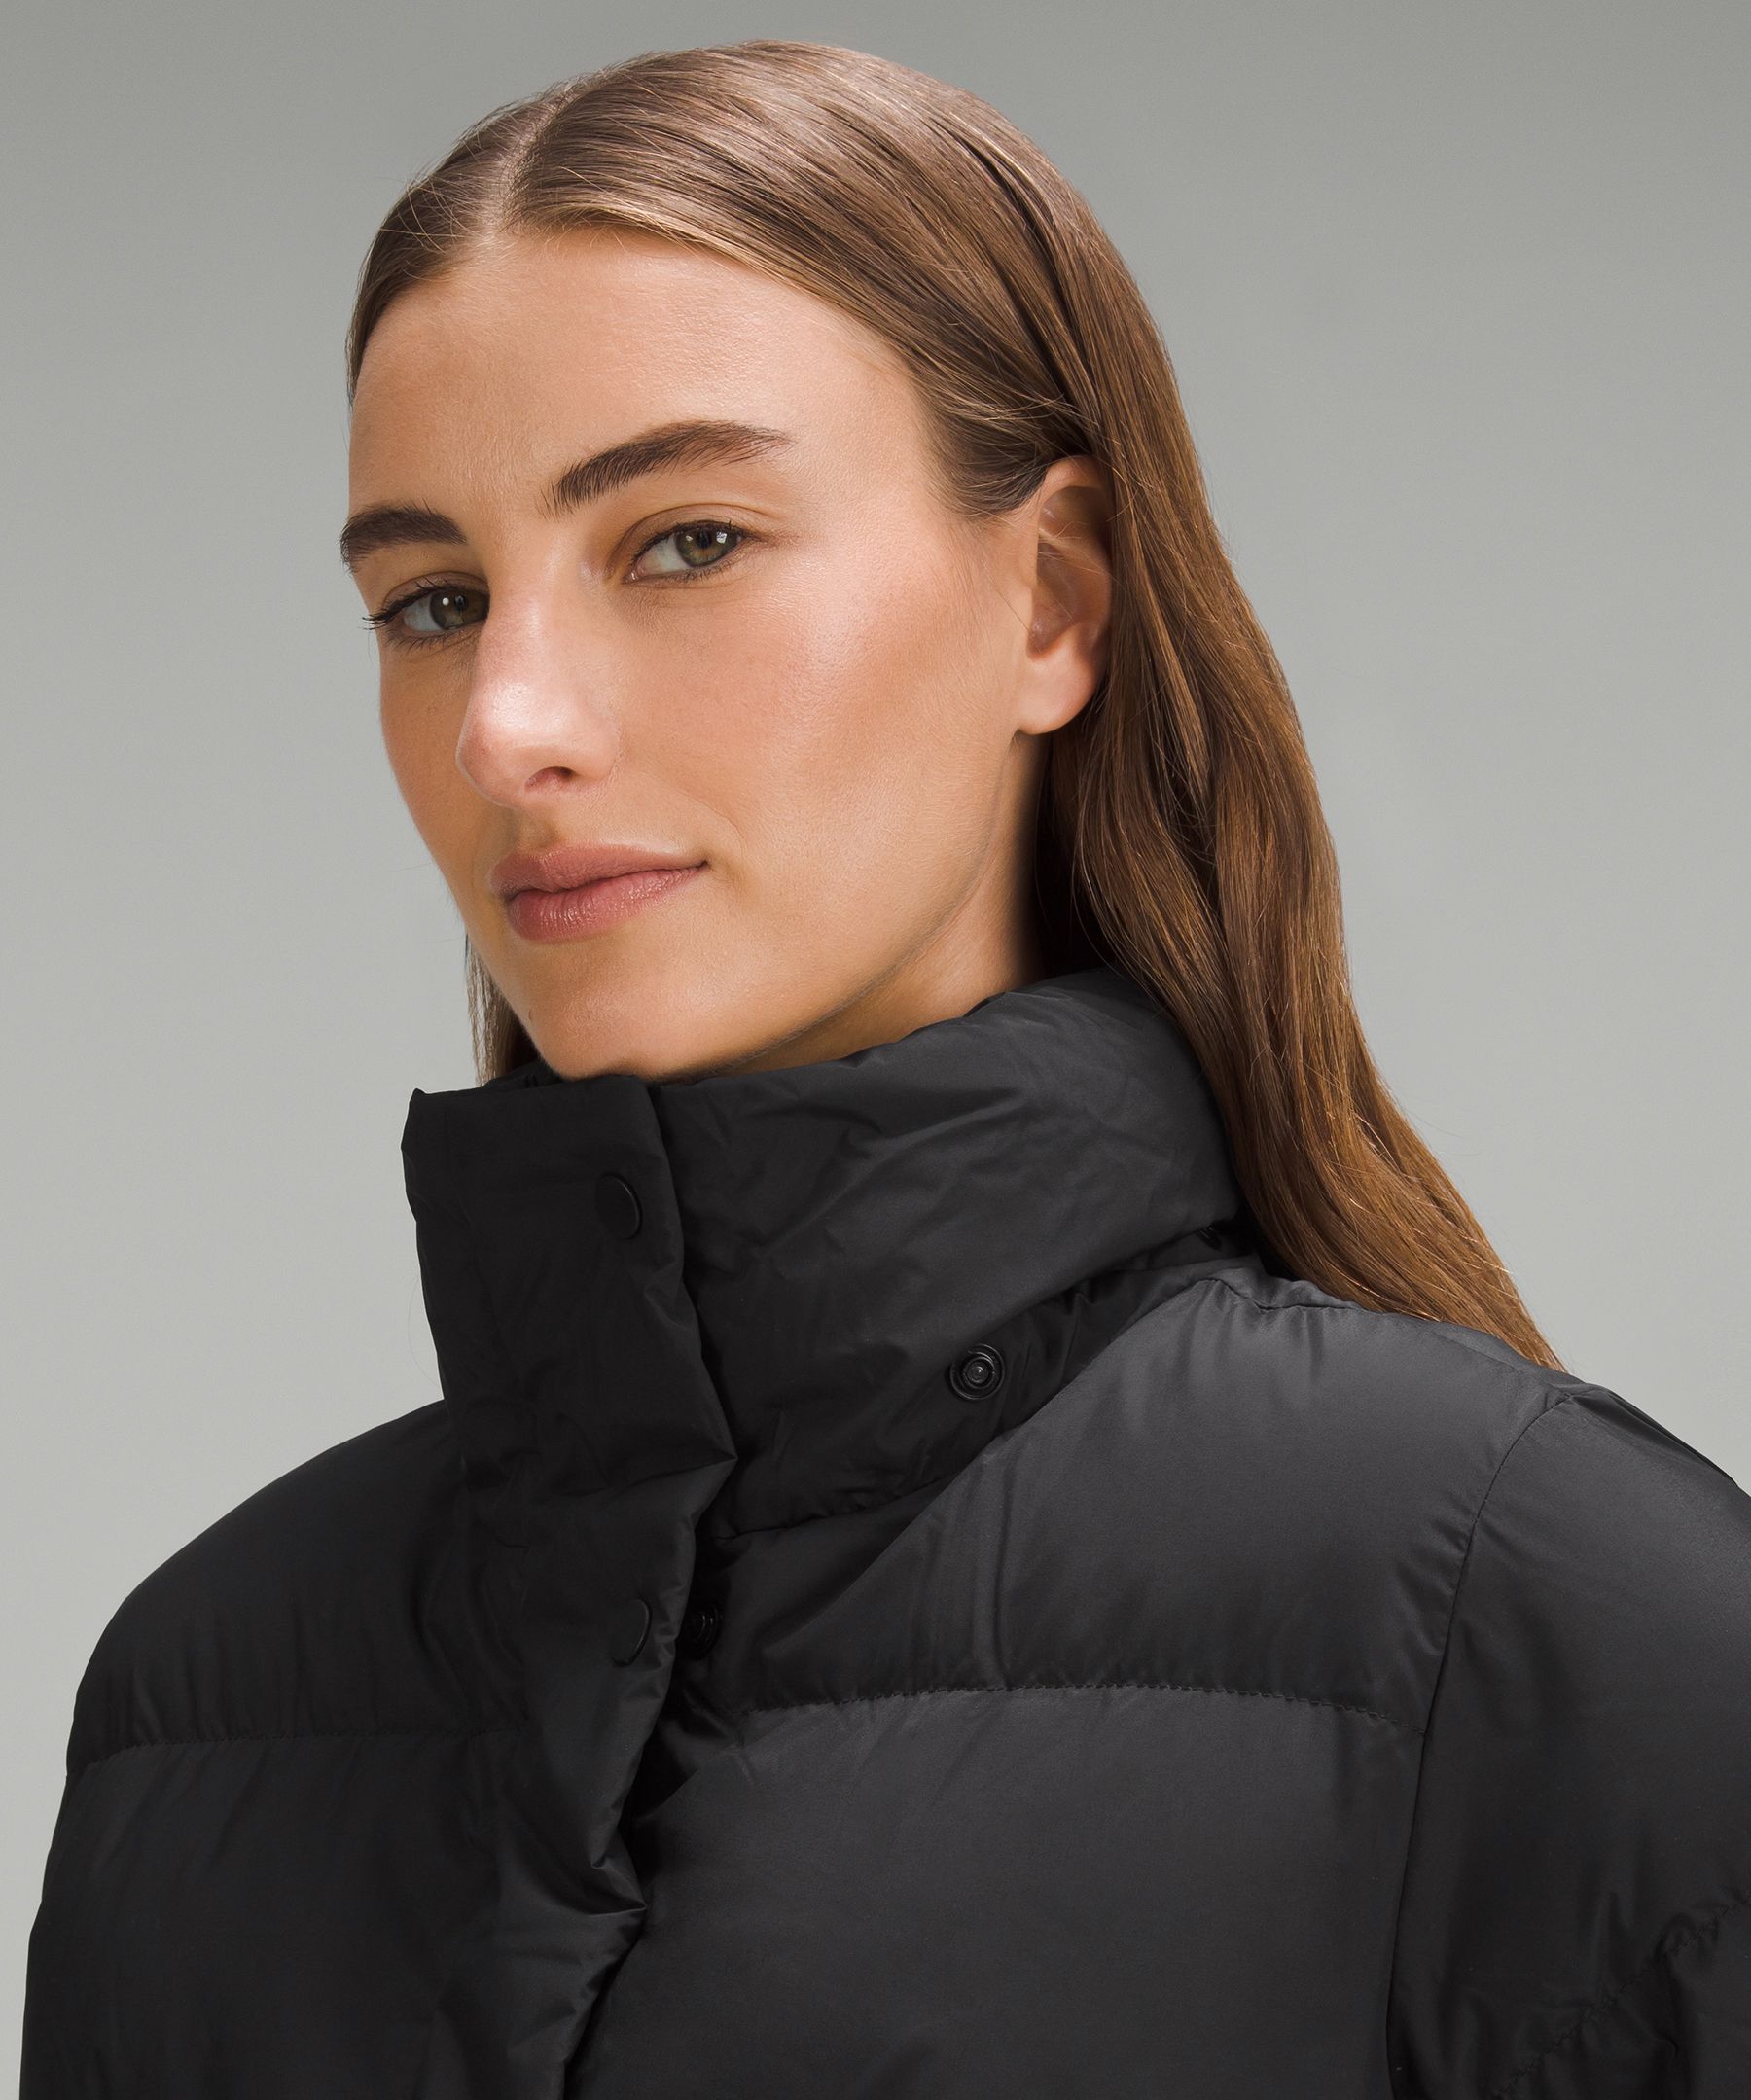 Found a dupe for the Lululemon Wunder Puff jacket from  💕 #lulu